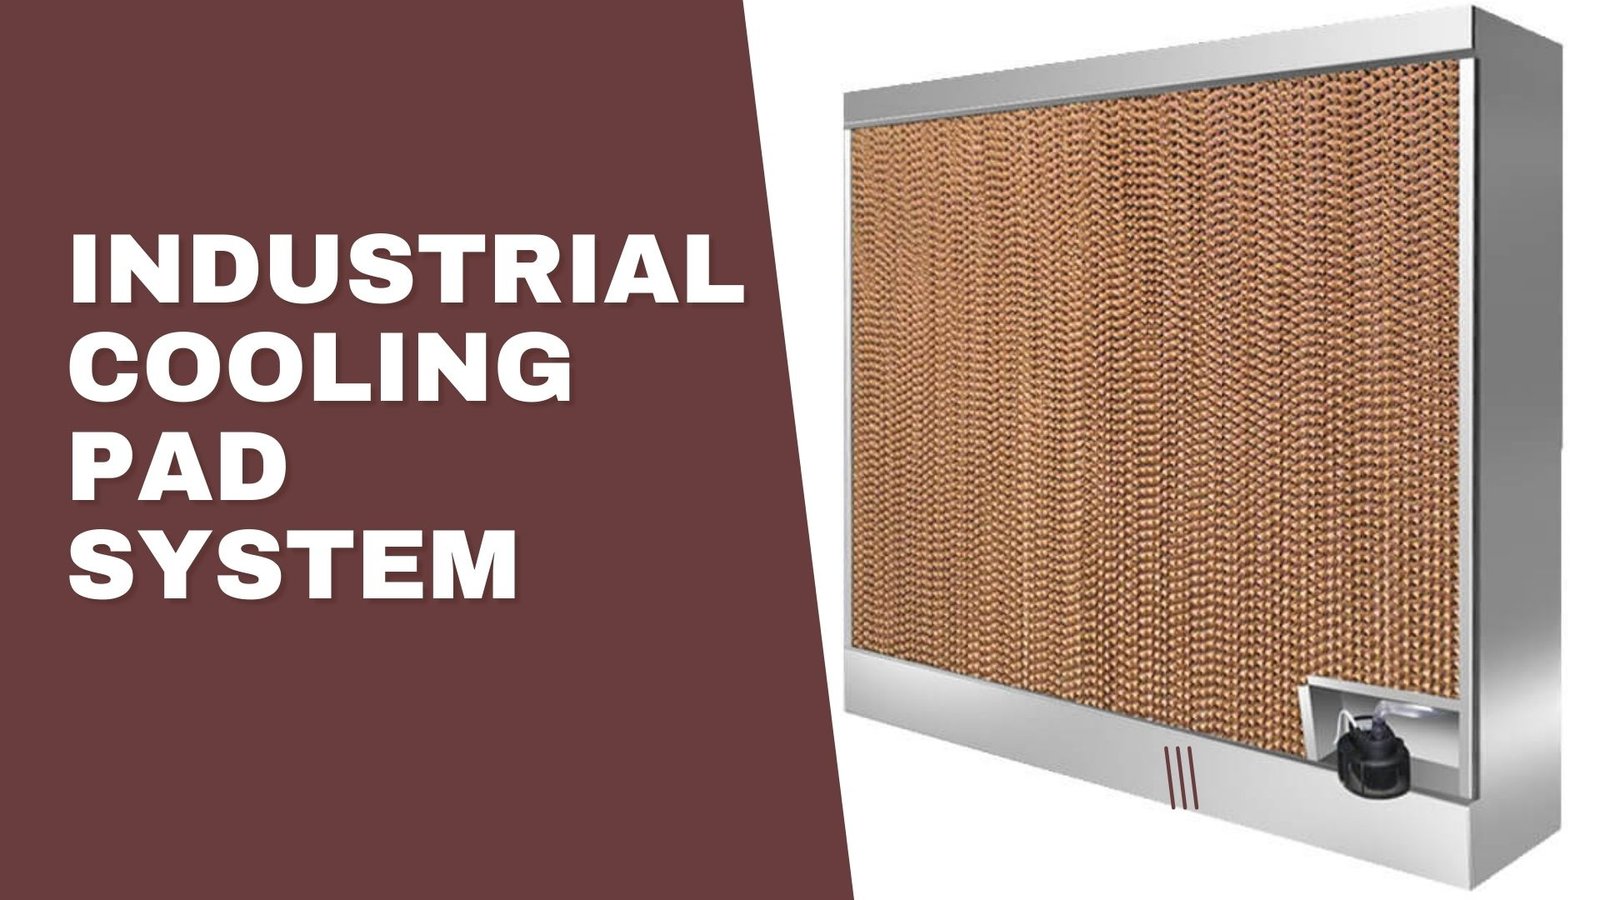 Industrial Cooling Pad System